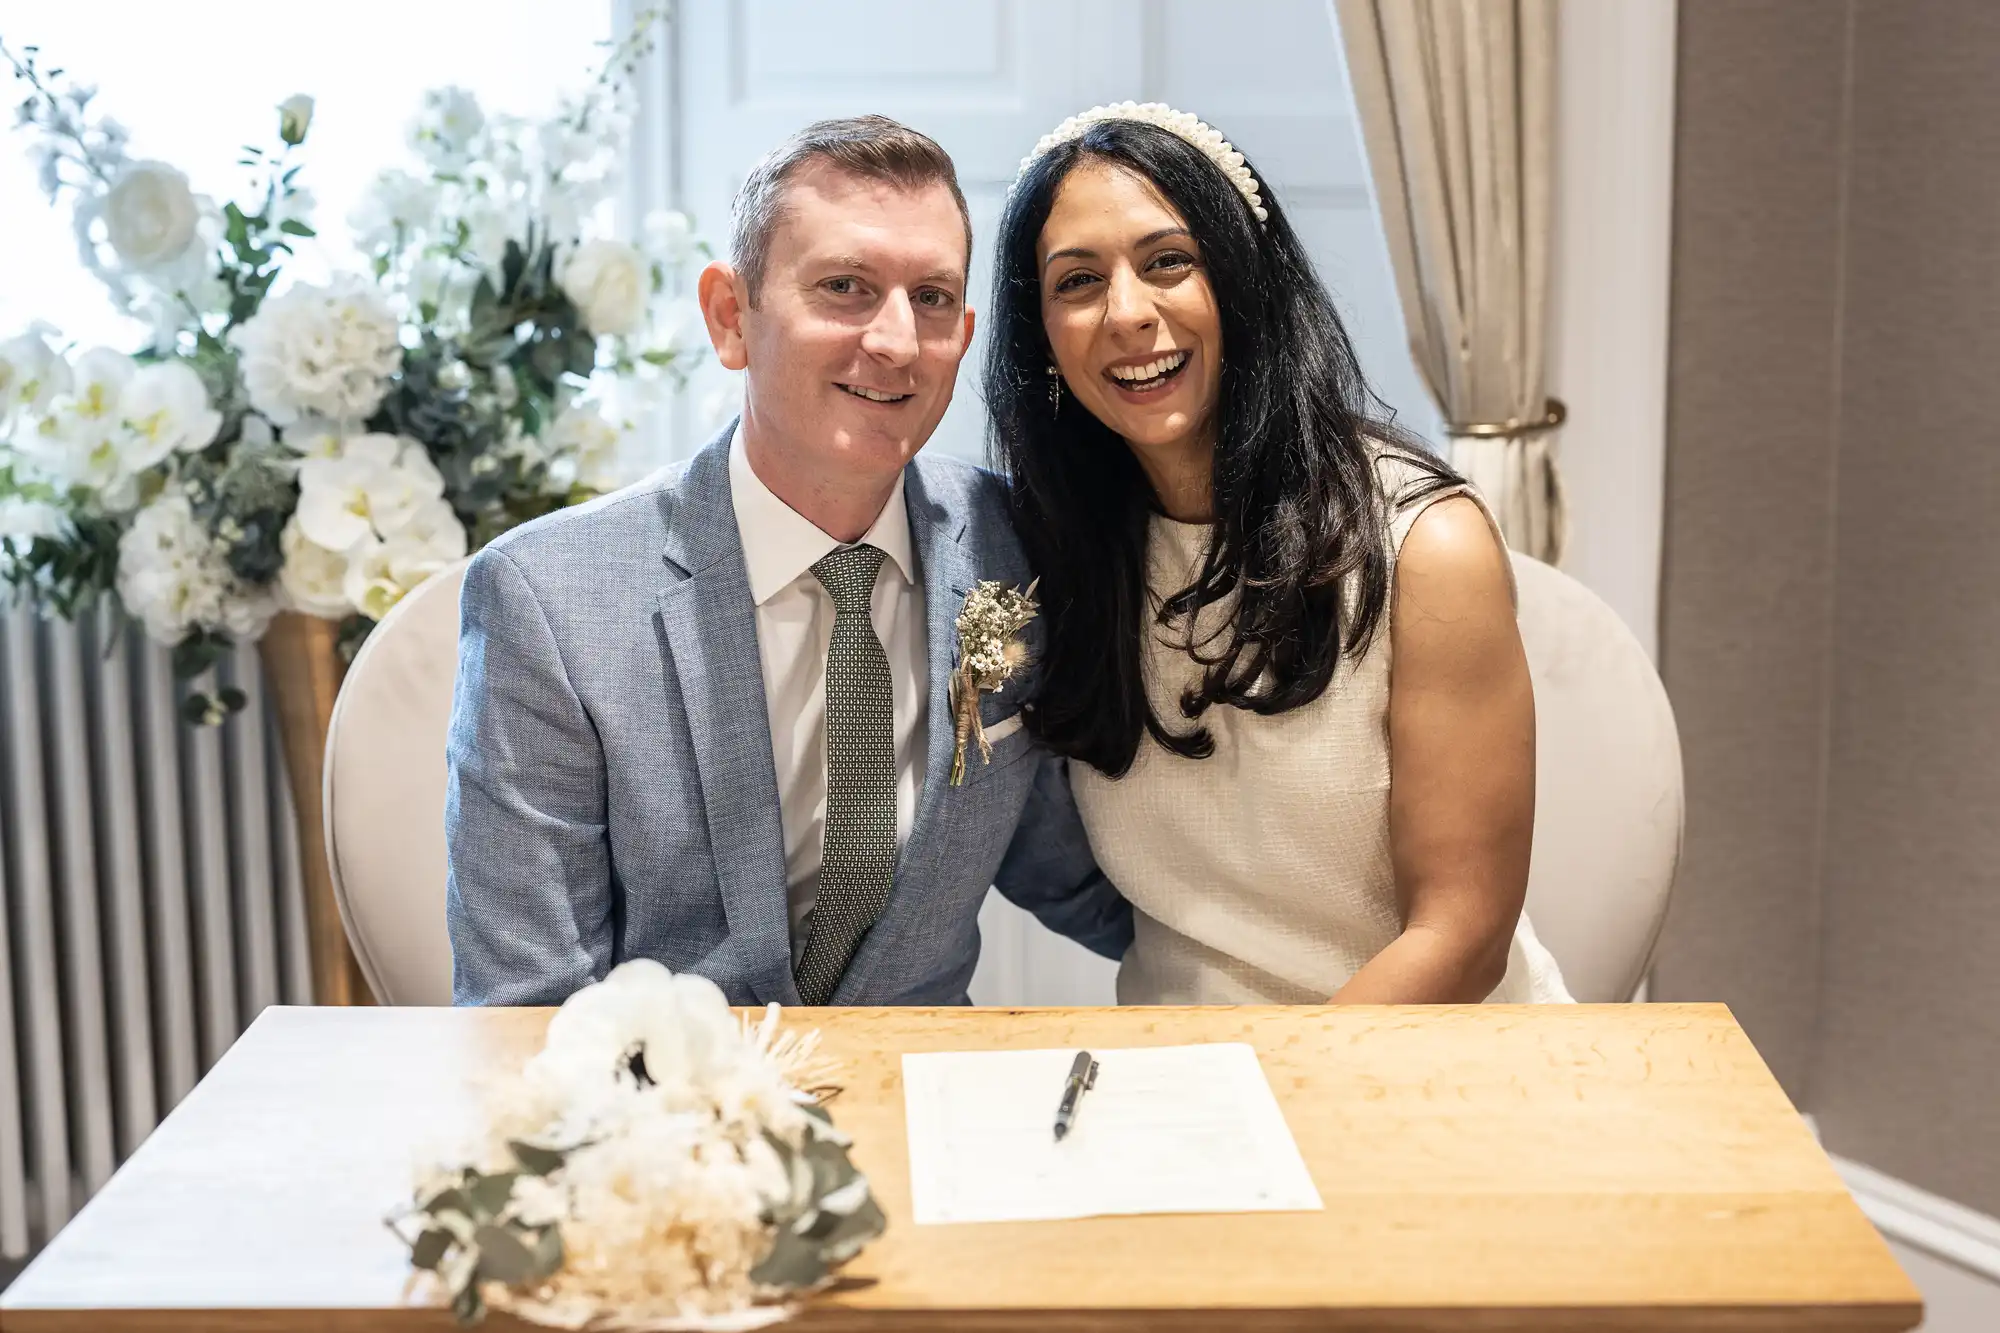 A man in a light gray suit and a woman in a white dress sit together at a table with a paper and pen, smiling. White floral decorations are in the background.